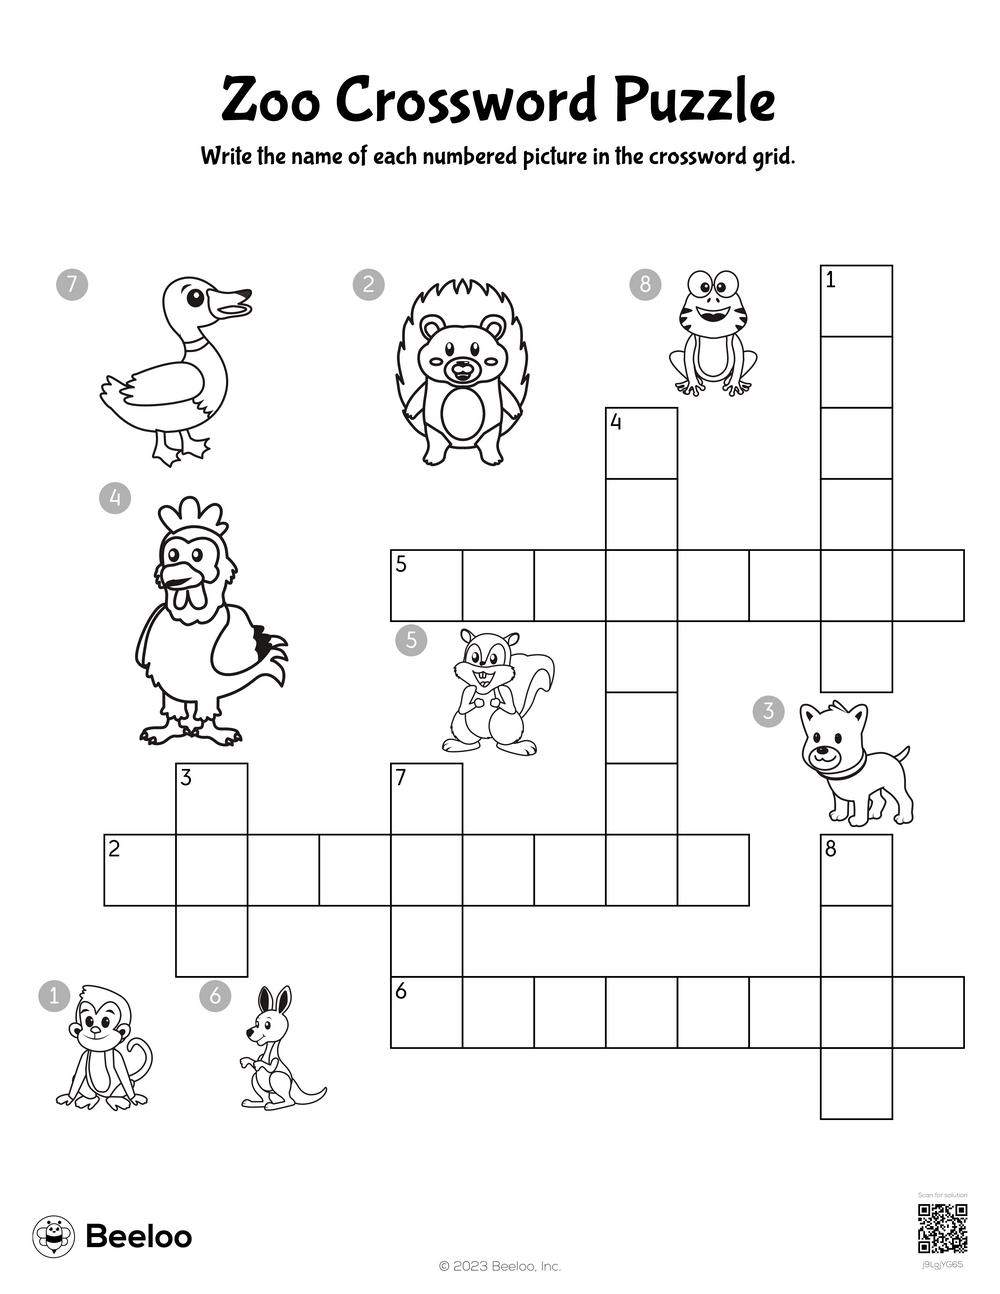 Zoo crossword puzzle â printable crafts and activities for kids